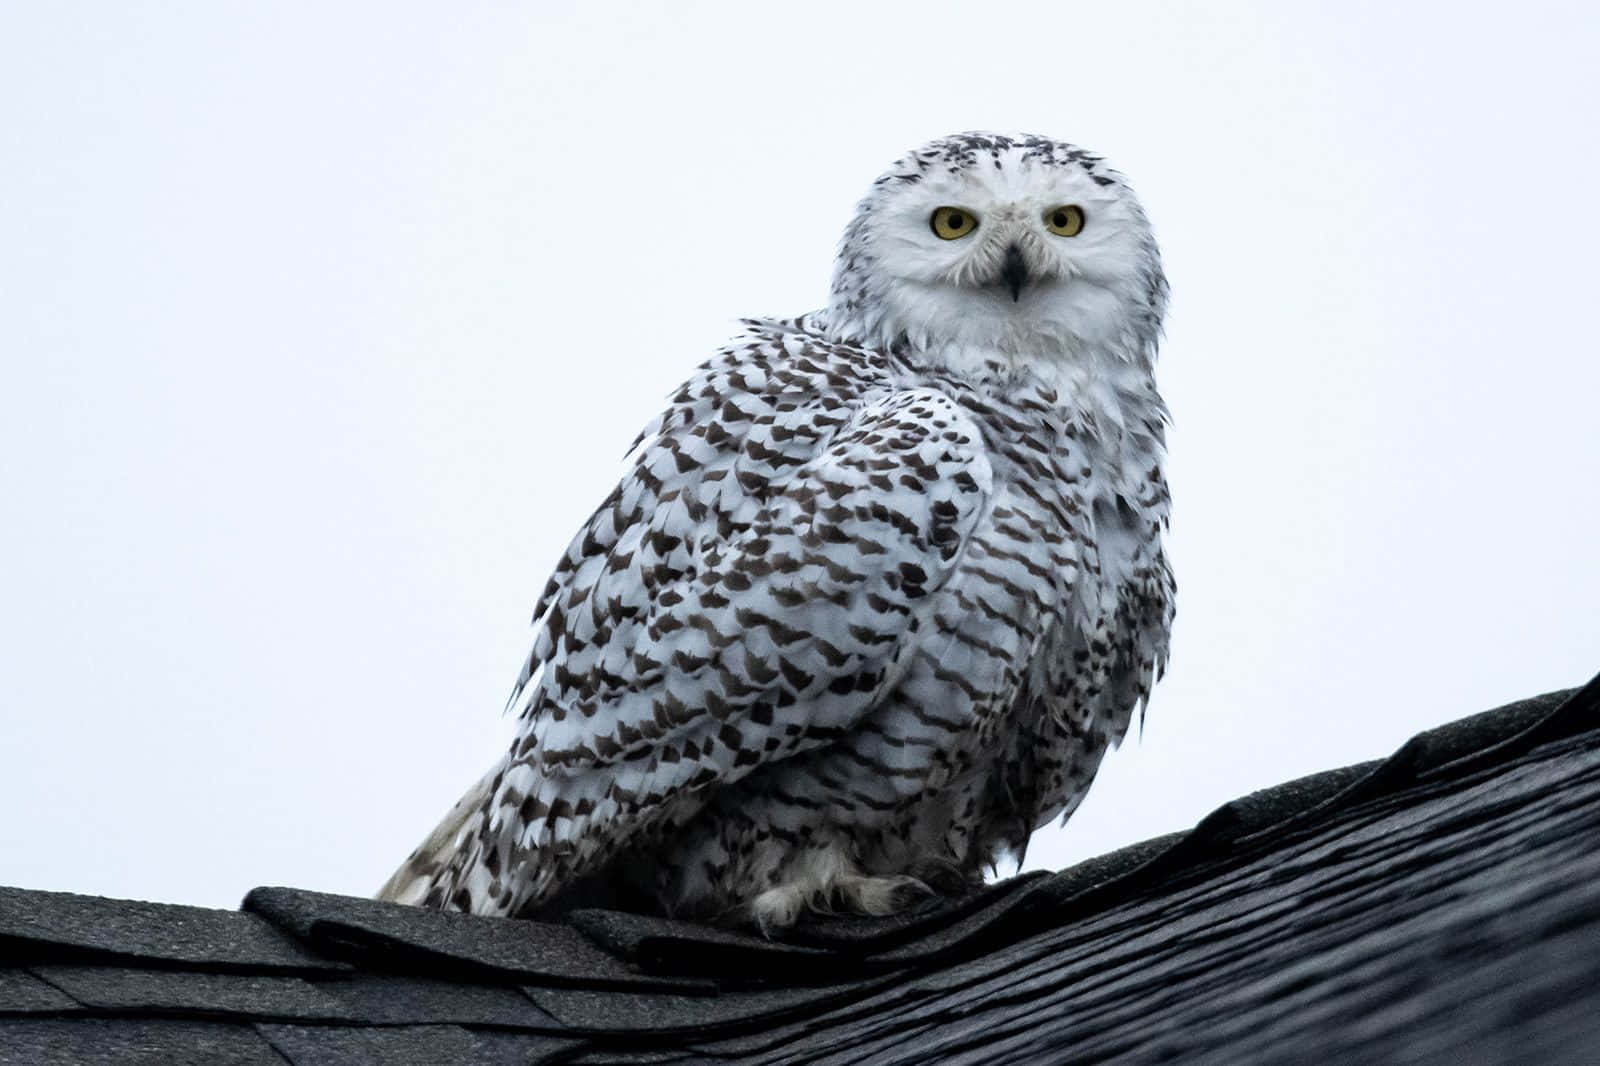 A Close Up of a Beautiful Snowy Owl